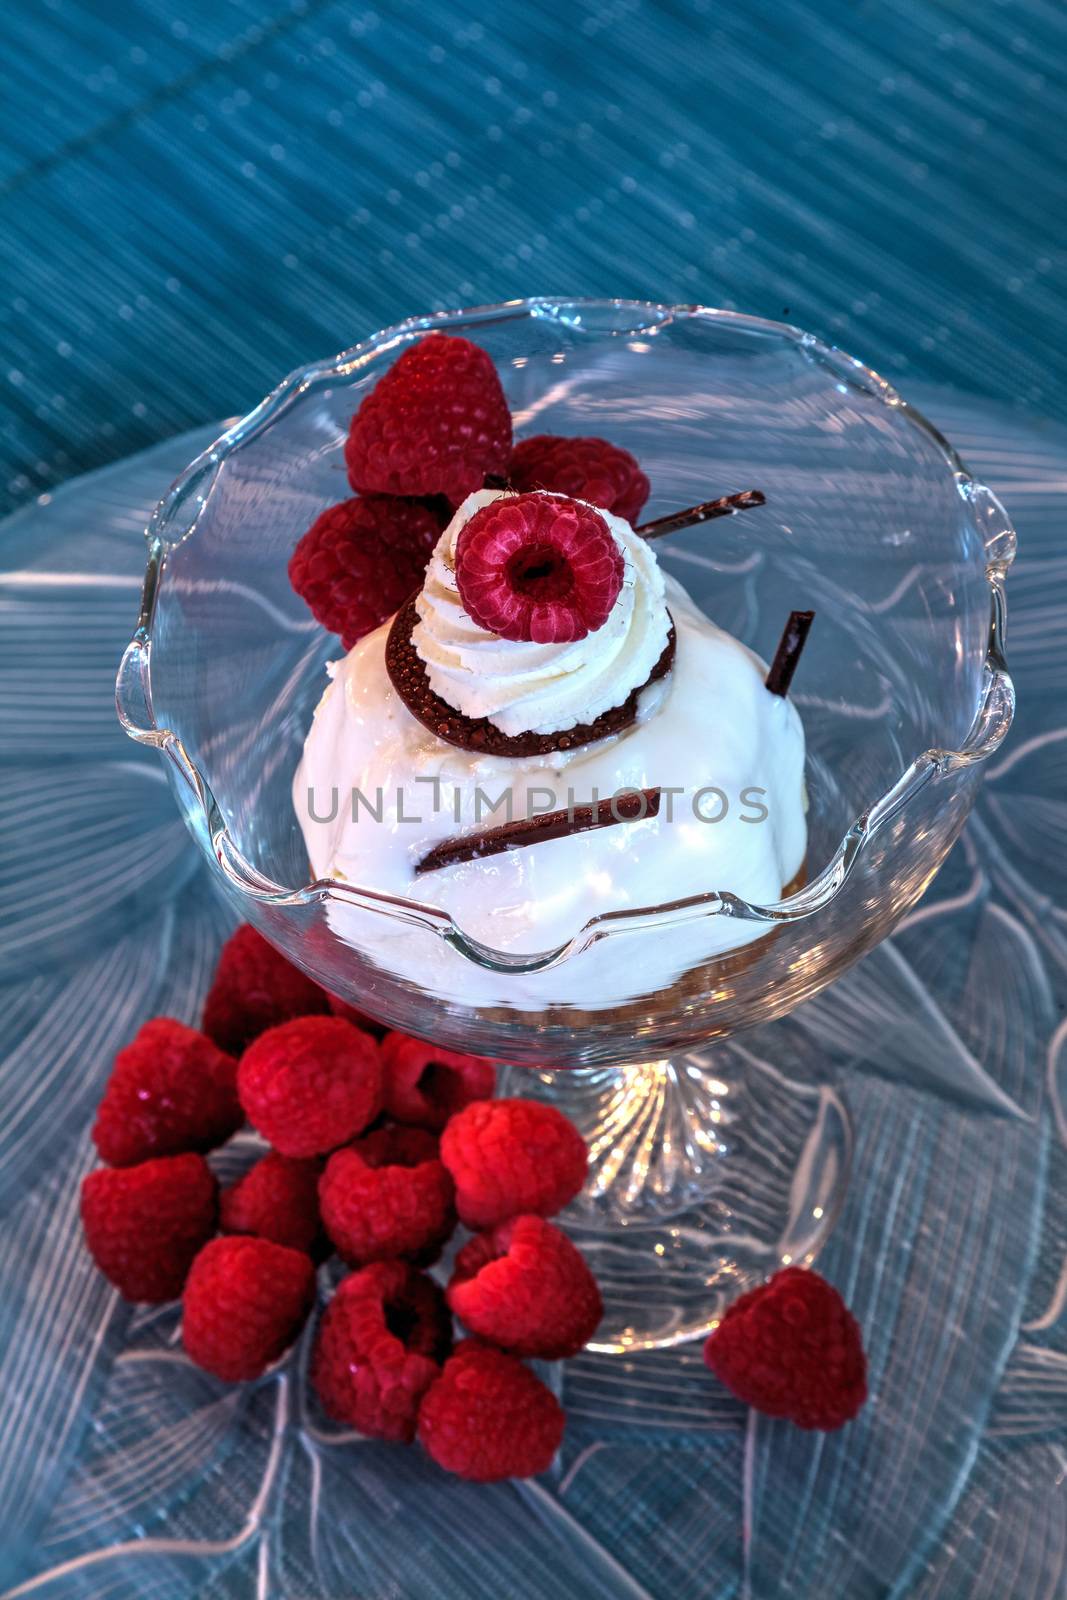 Dessert dish of cheesecake, shaved chocolate and raspberries on a glass plate.